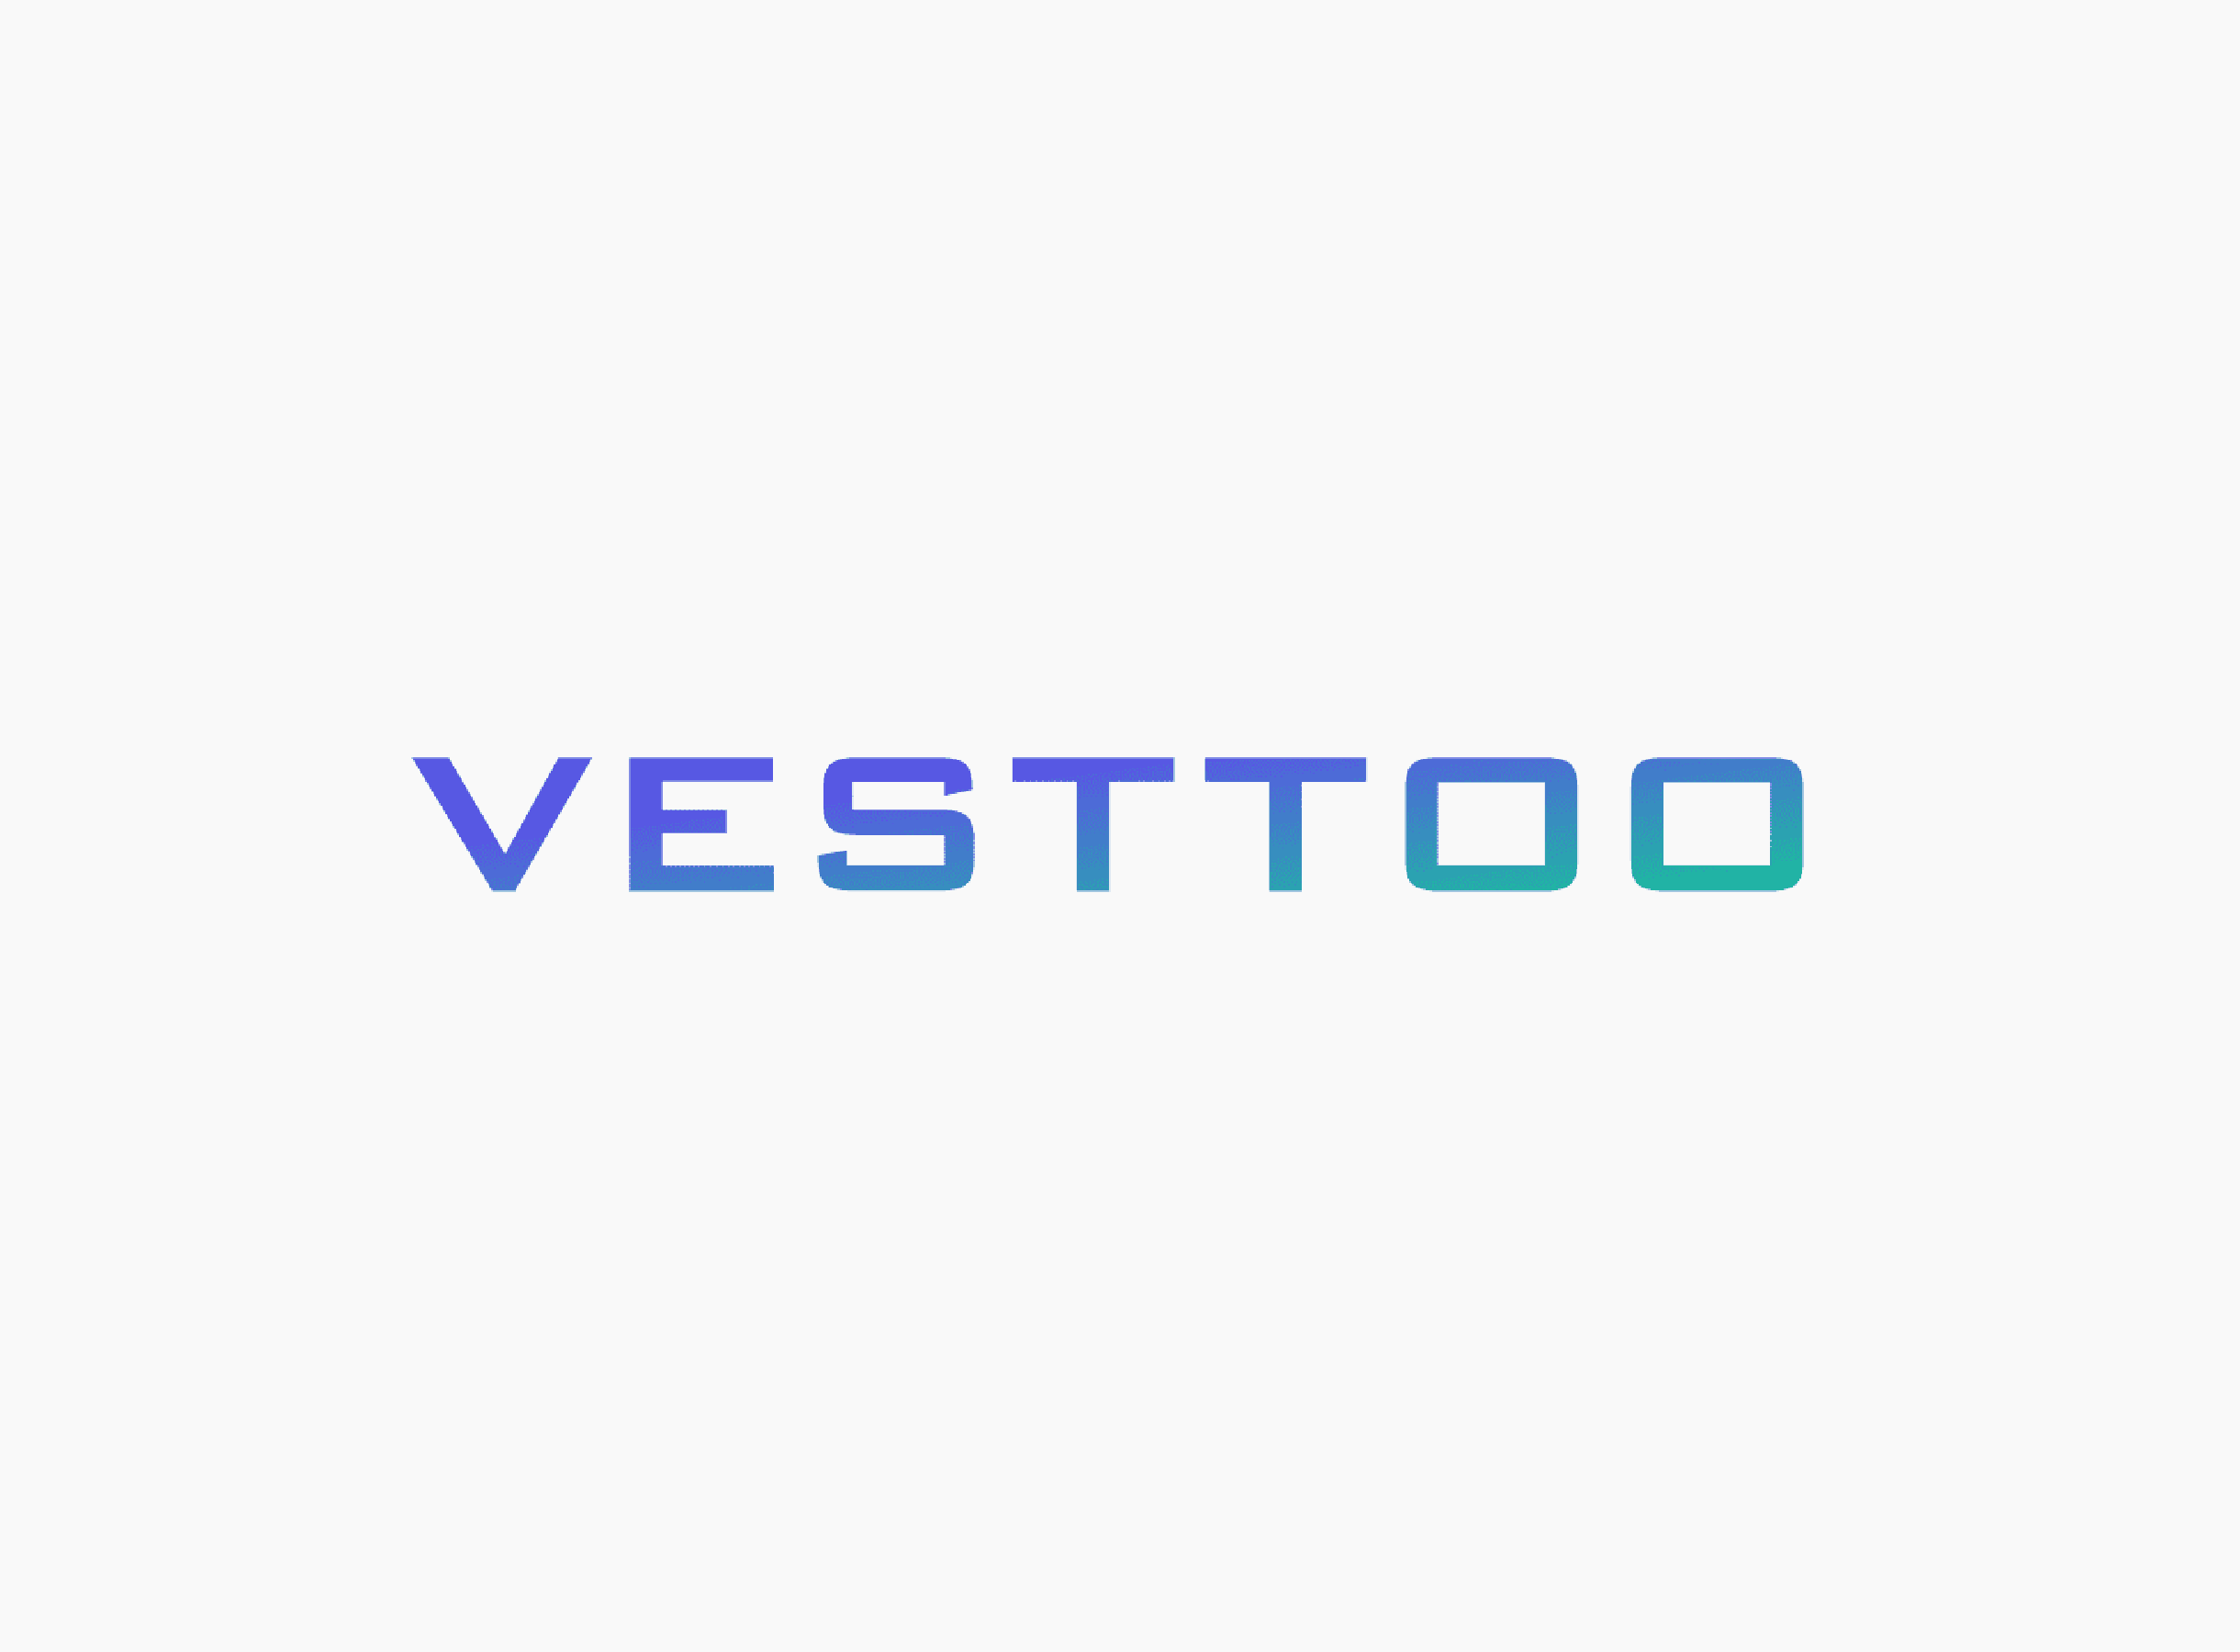 Vesttoo Joins NVIDIA Inception to Further Develop AI-Based Technologies and Grow Insurance Linked Program